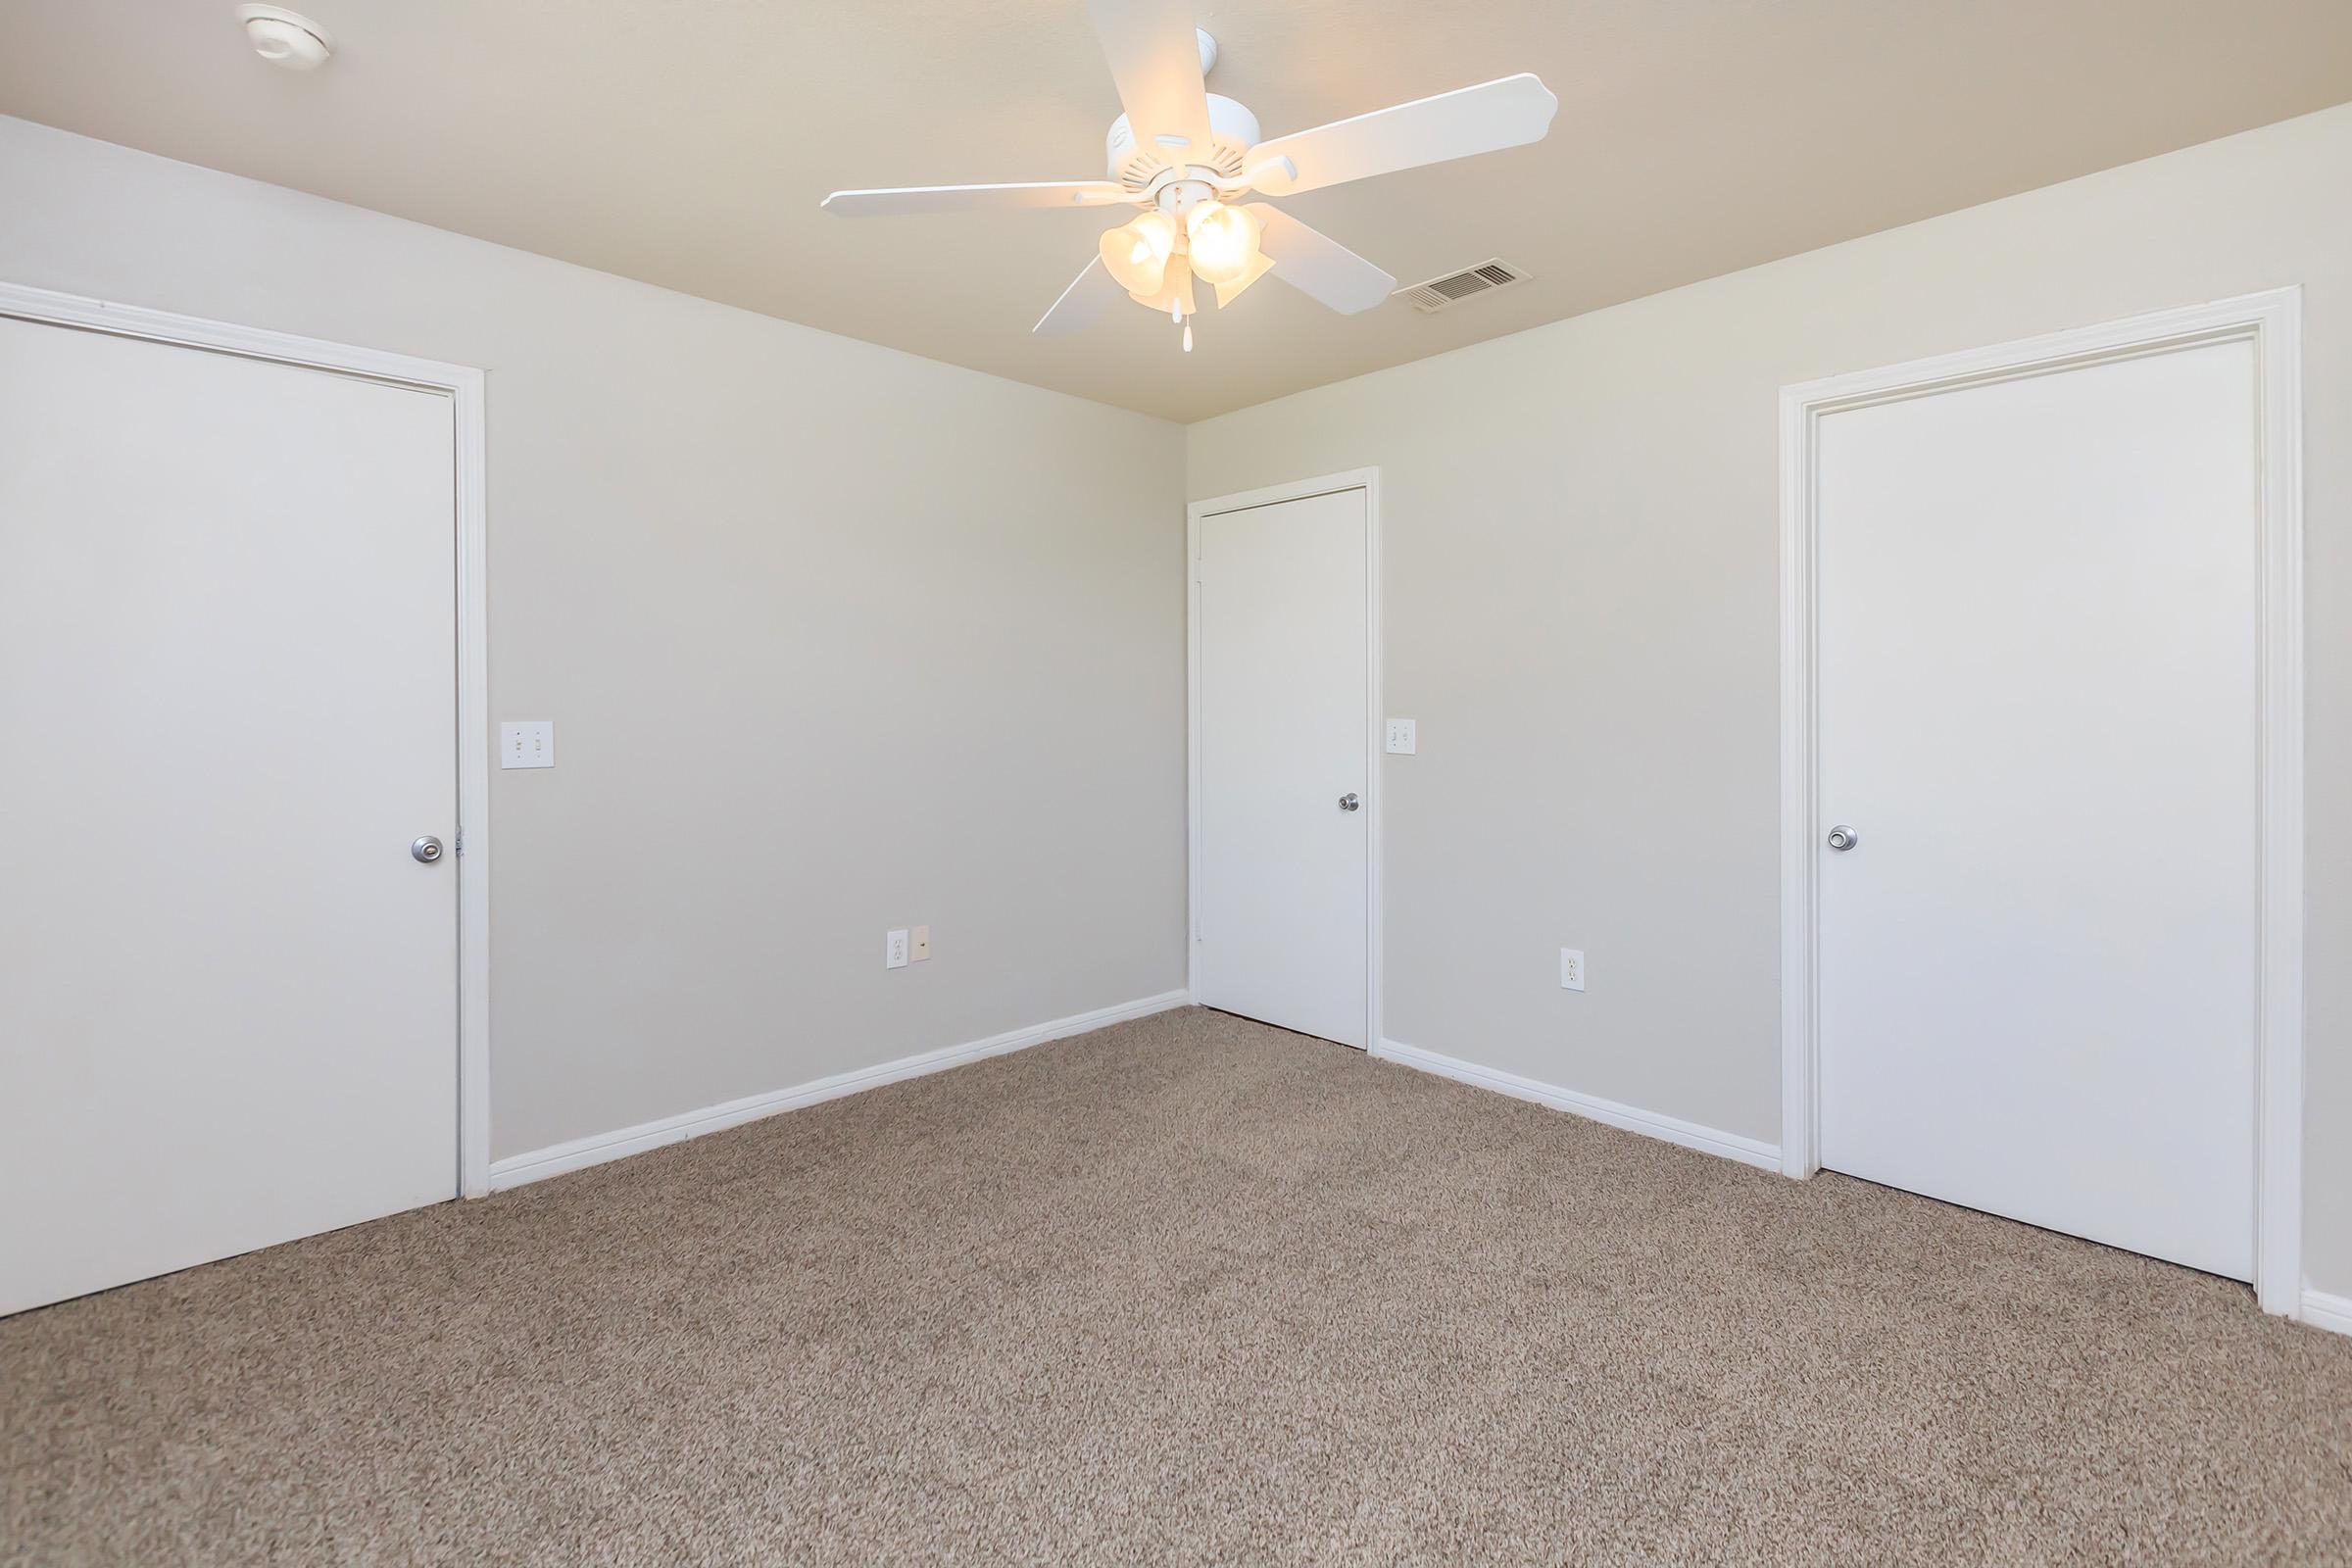 CEILING FANS AND SOFT CARPETING